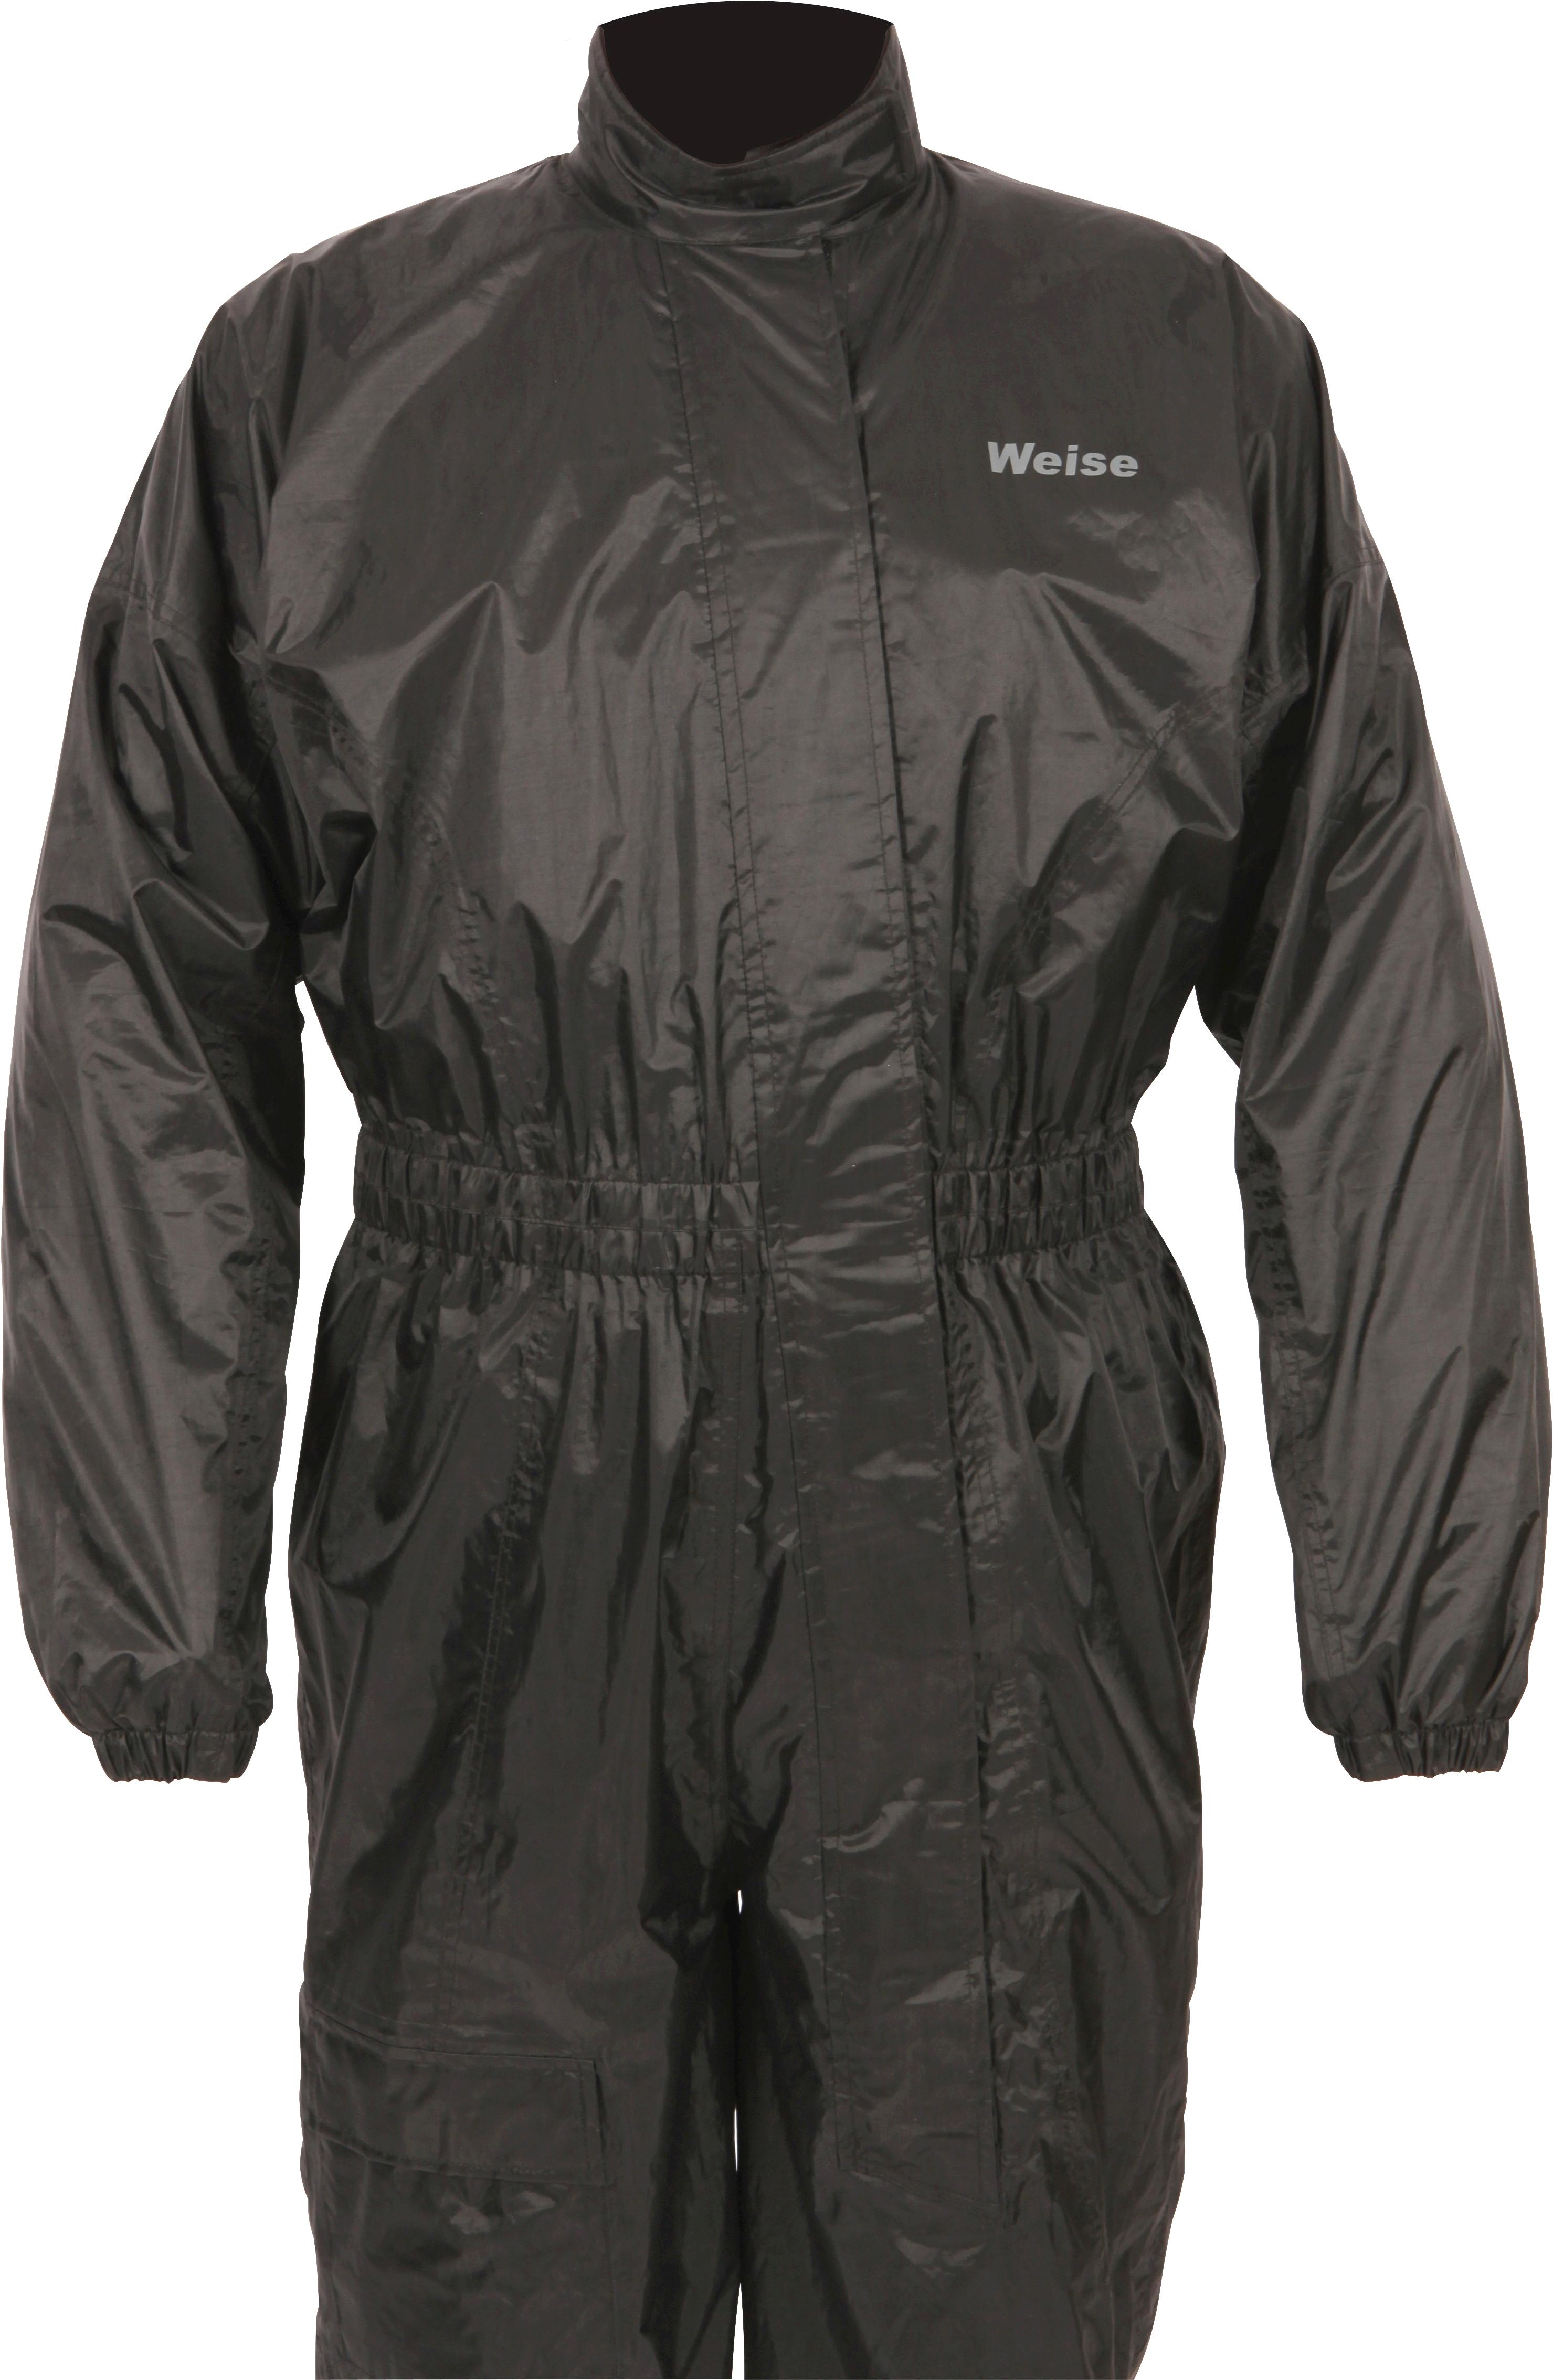 Weise Tempest Oversuit 3Xl